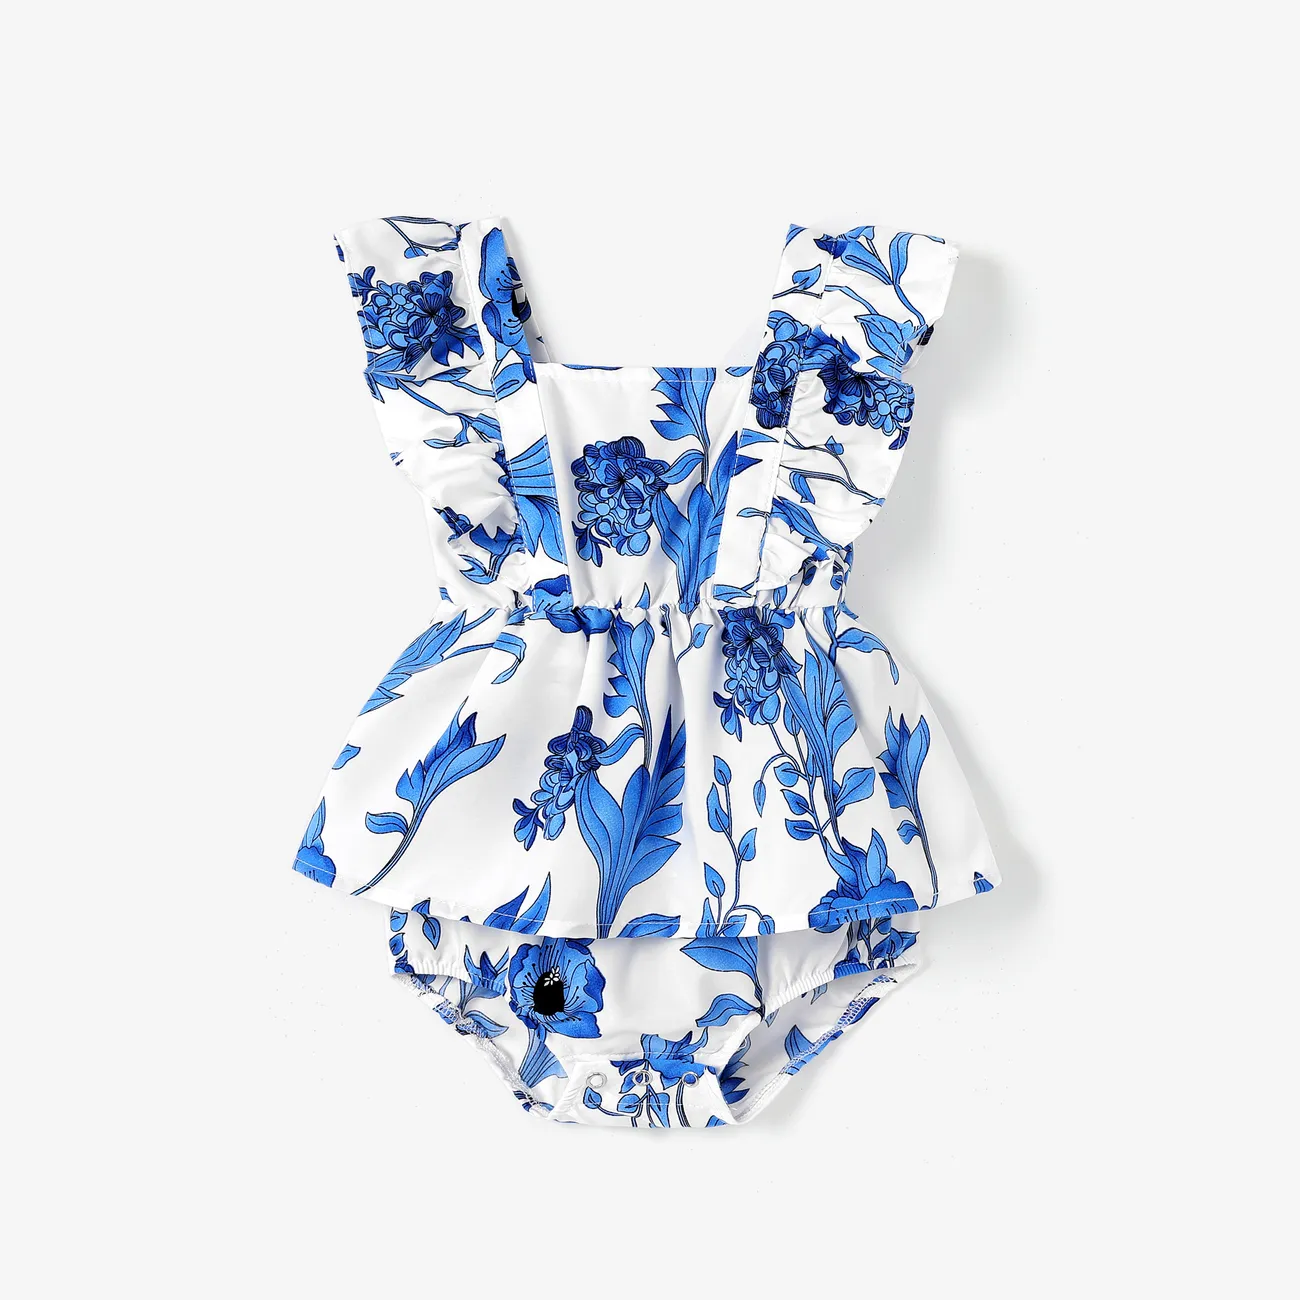 Mommy and Me Blue Floral Shirred Top Ruffle Hem Strap Dress  Blue big image 1